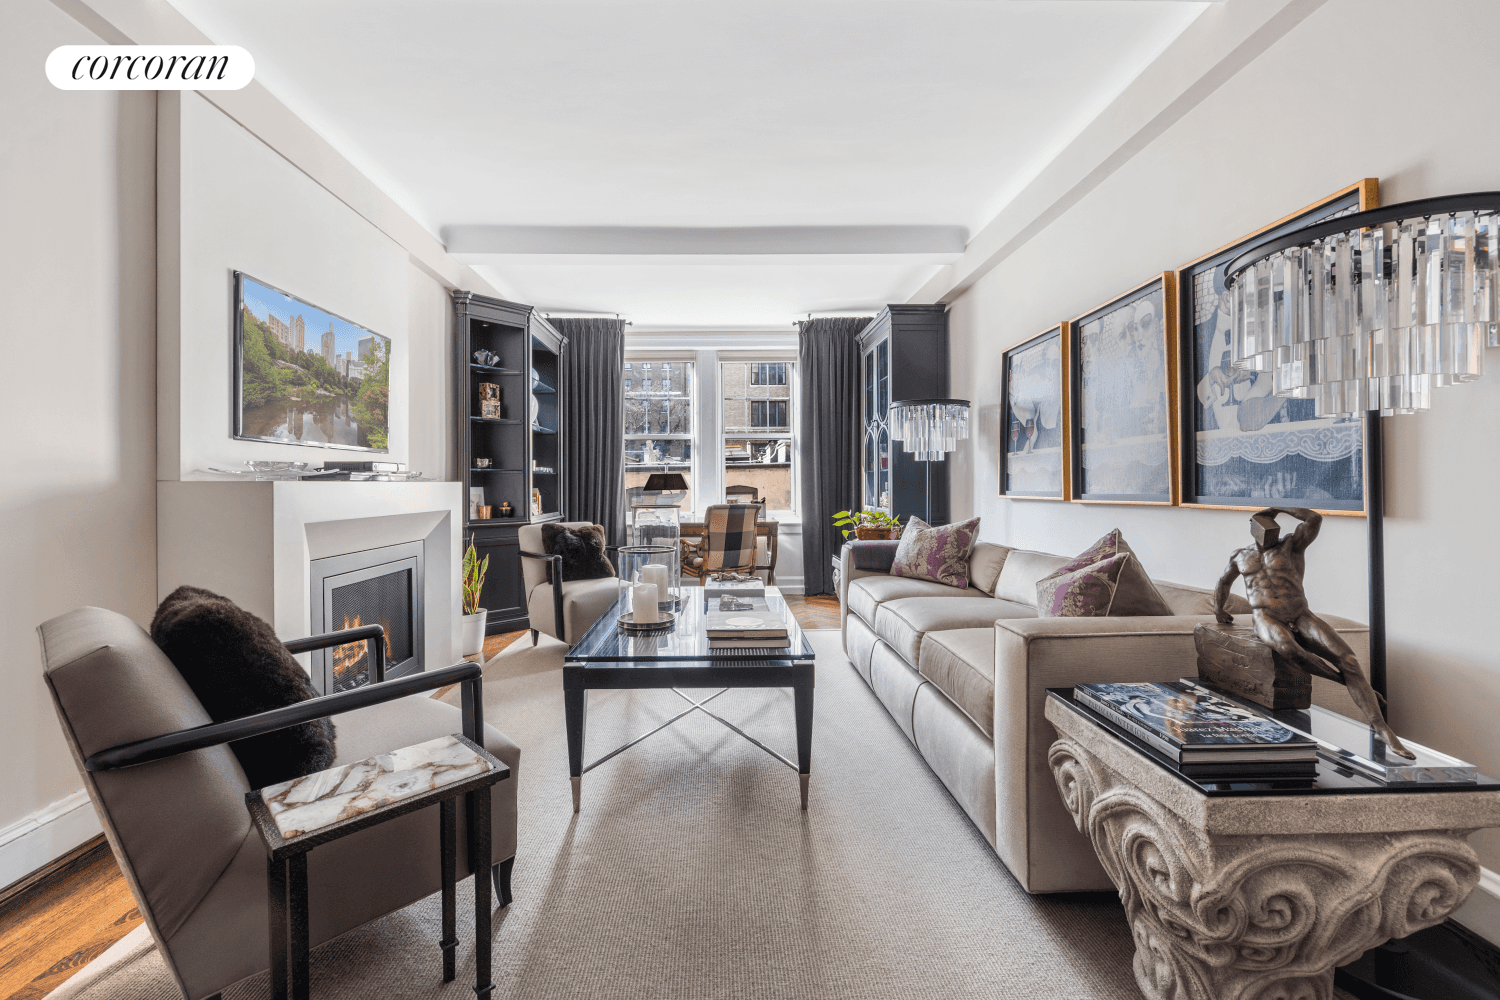 Unit 409 is a large south facing one bedroom in The Beekman, 575 Park Avenue, a luxurious white glove cooperative residence at the corner of East 63rd Street and Park ...